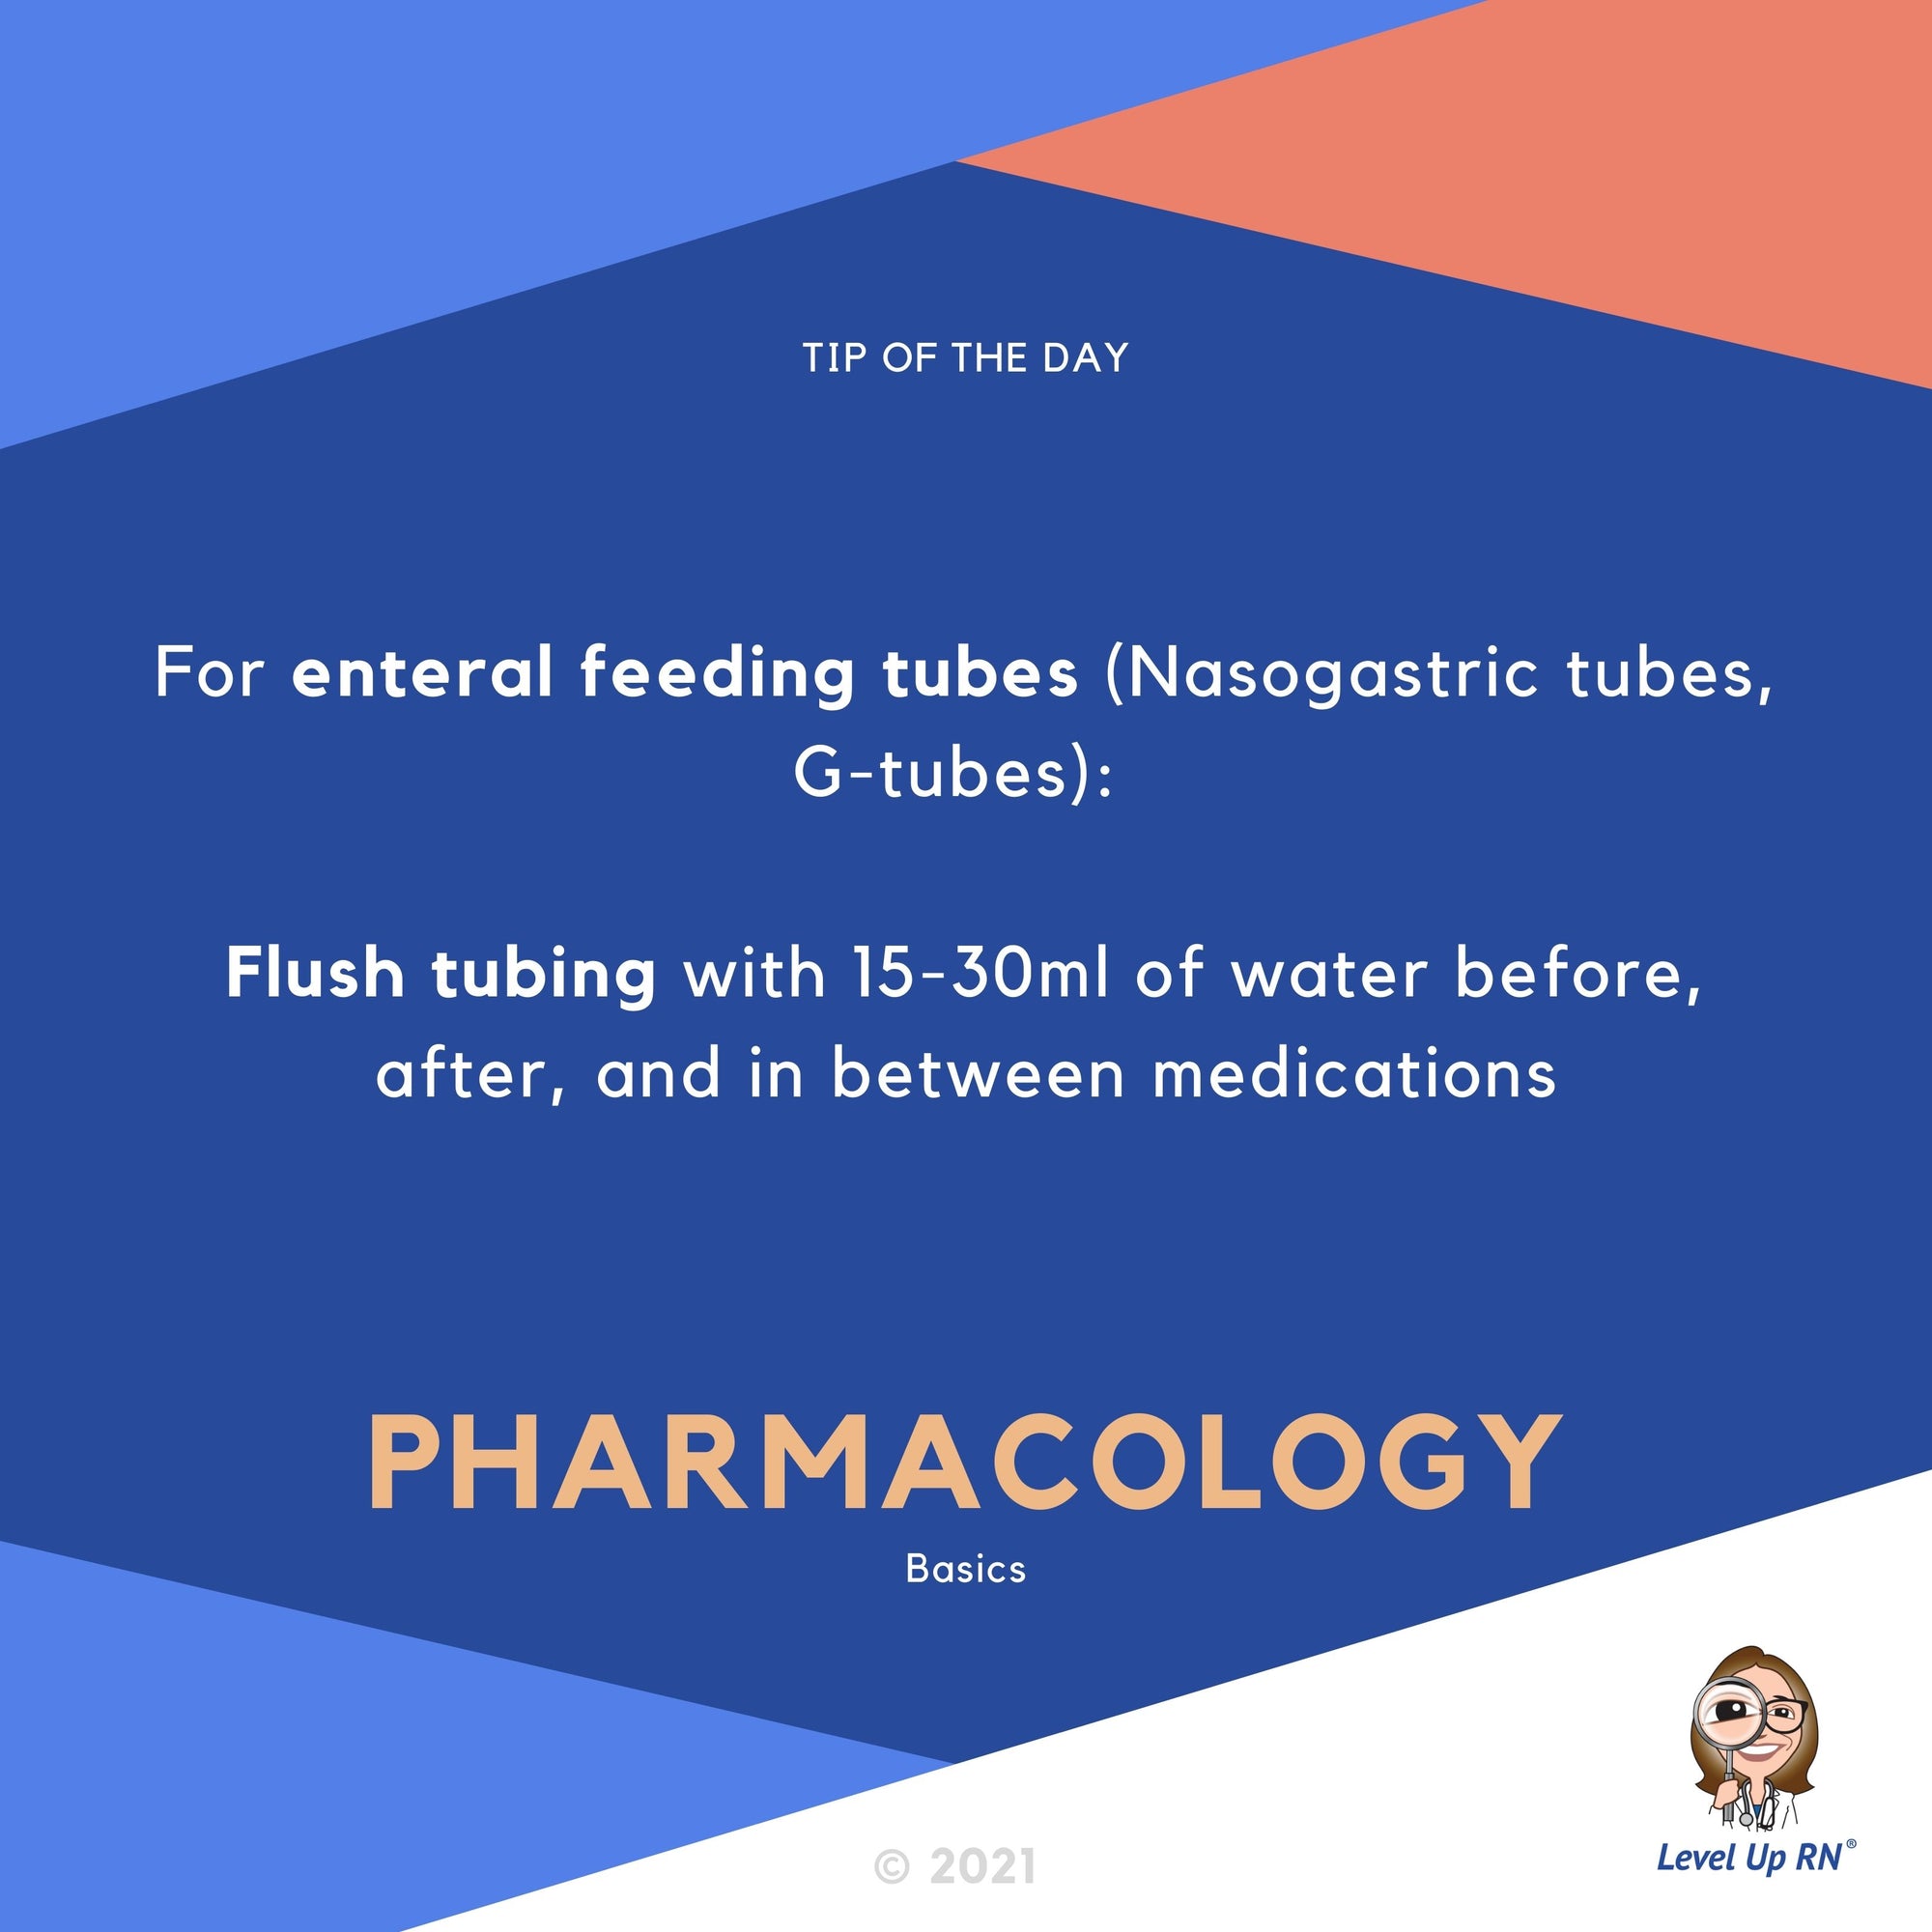 For enteral feeding tubes (Nasogastric tubes, G-tubes): Flush tubing with 15-30ml of water before, after, and in between medications